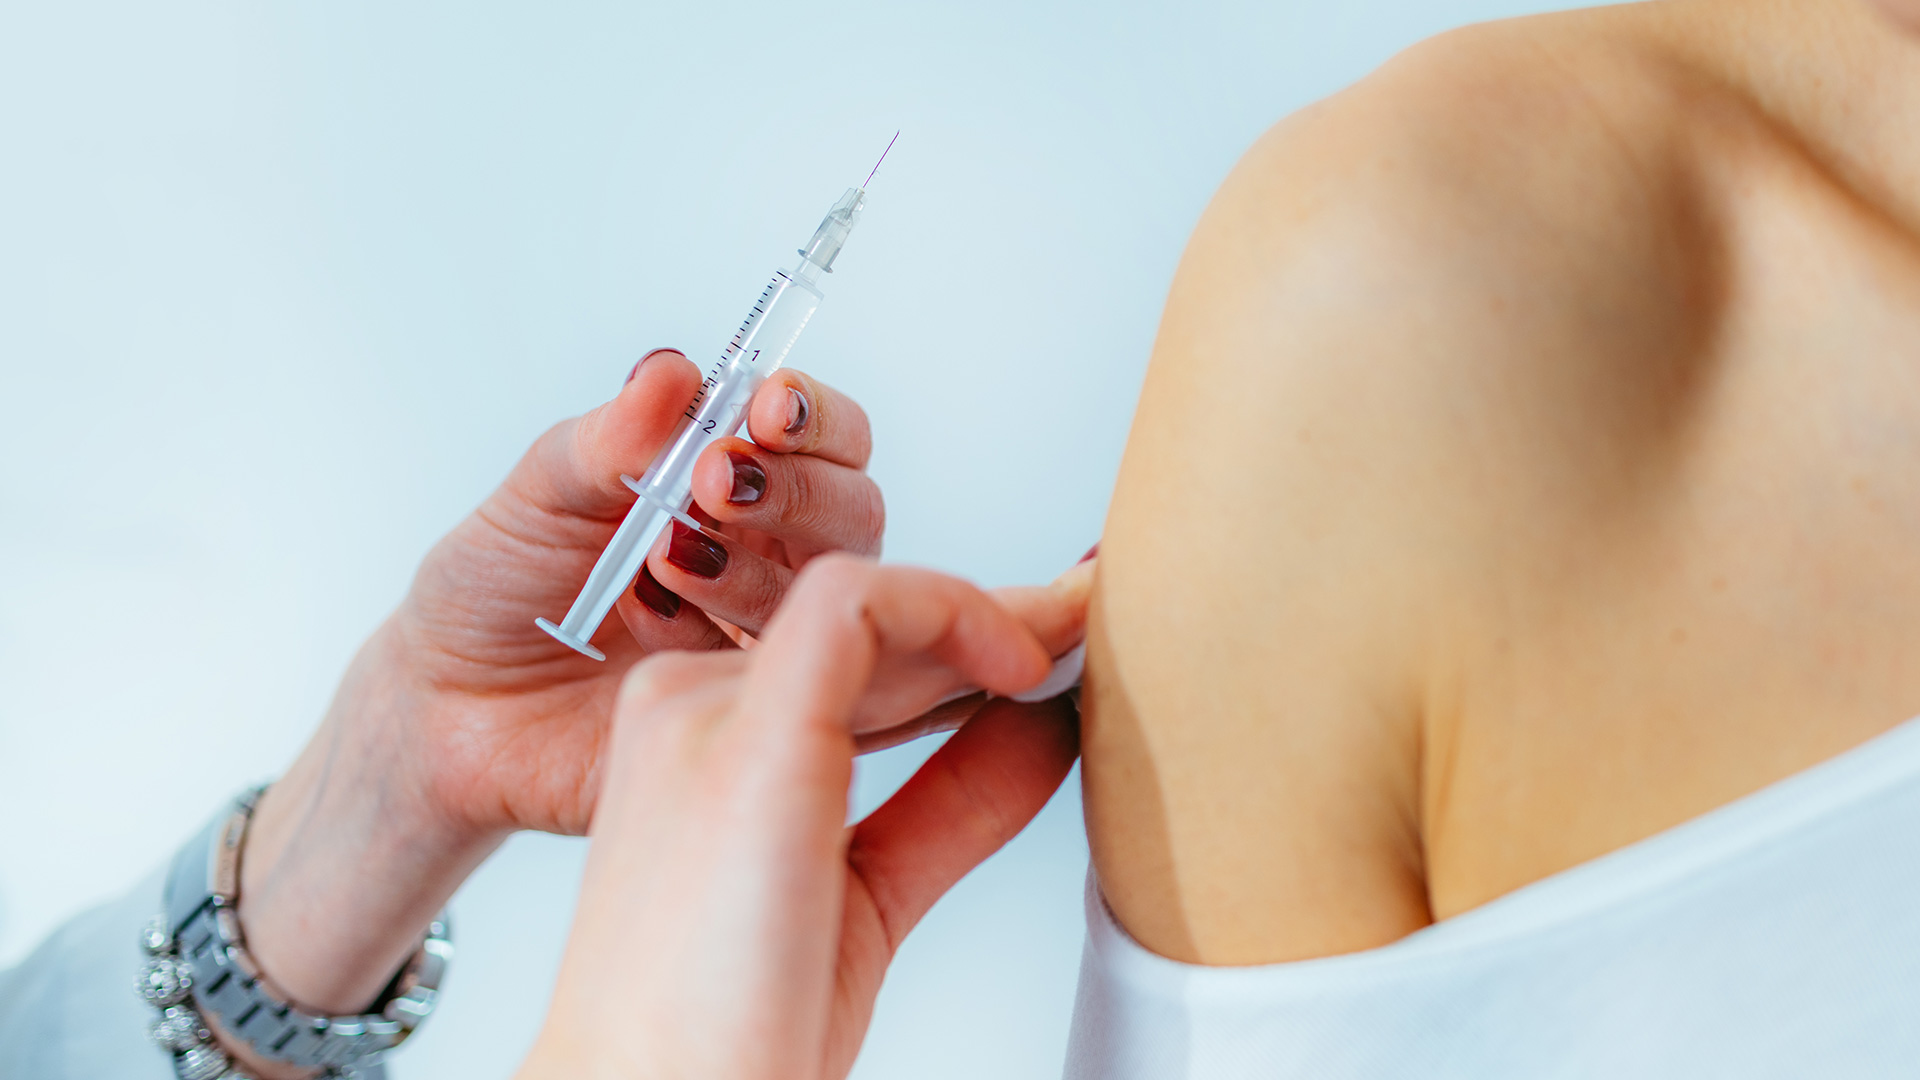 Tetanus shots – When and why do you need them? | TheHealthSite.com